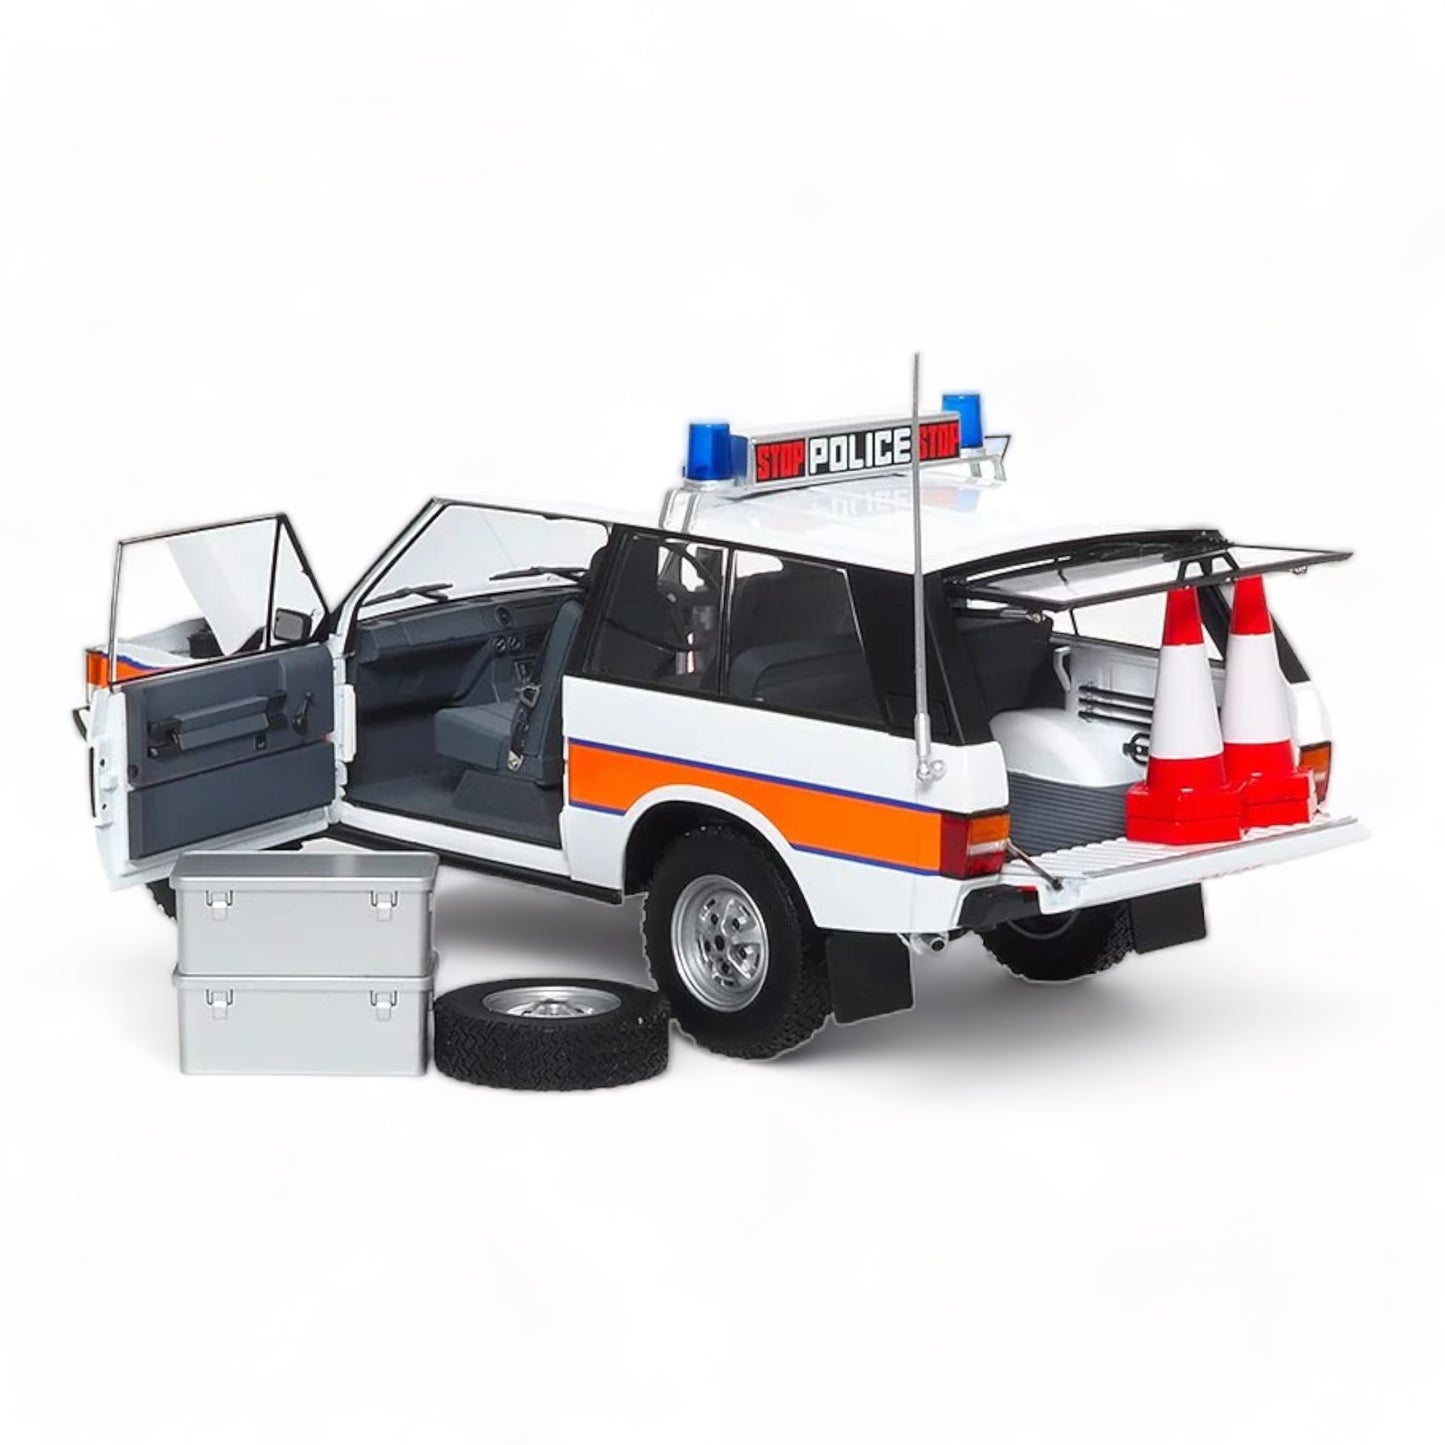 1/18 Diecast  Land Rover Range Rover Classic Police White 1970 by Almost Real Scale Model Car|Sold in Dturman.com Dubai UAE.